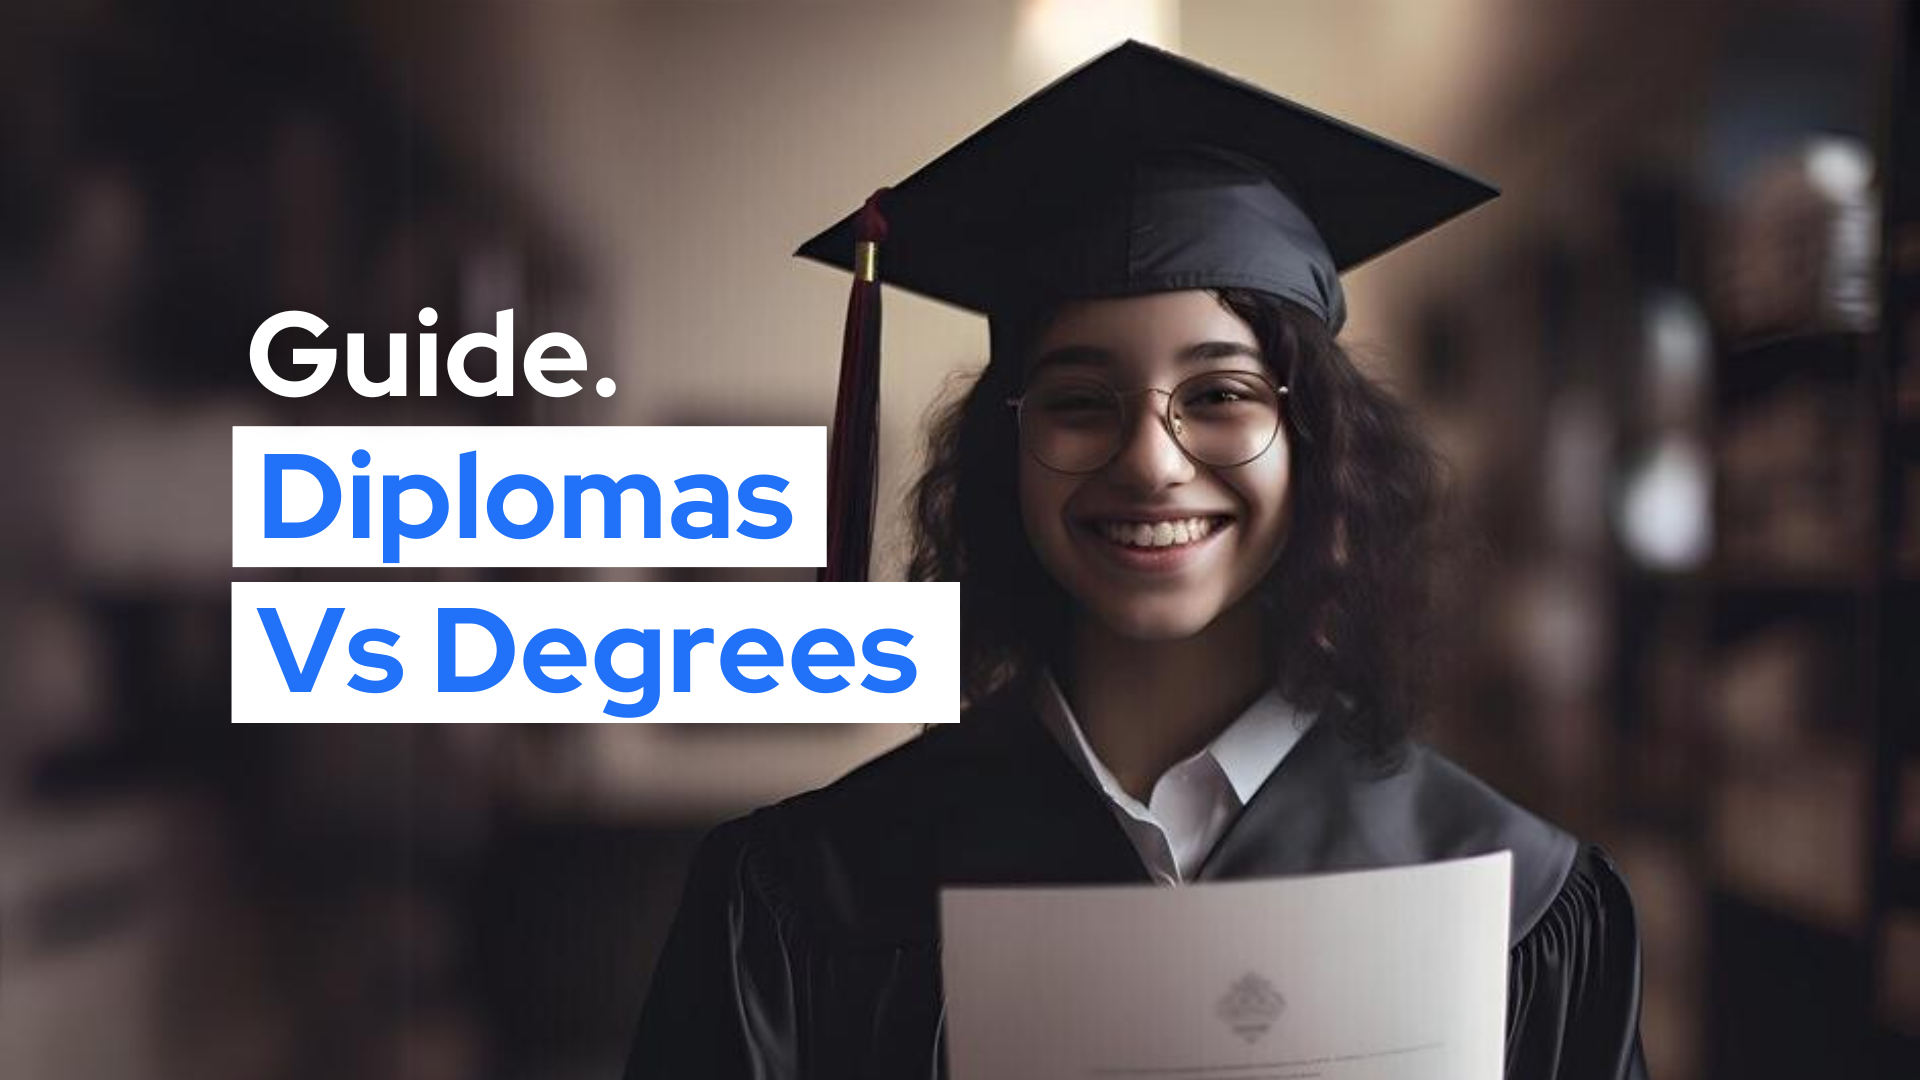 Girl holding certificate with text Diploma Vs Degree Malta. Guide.